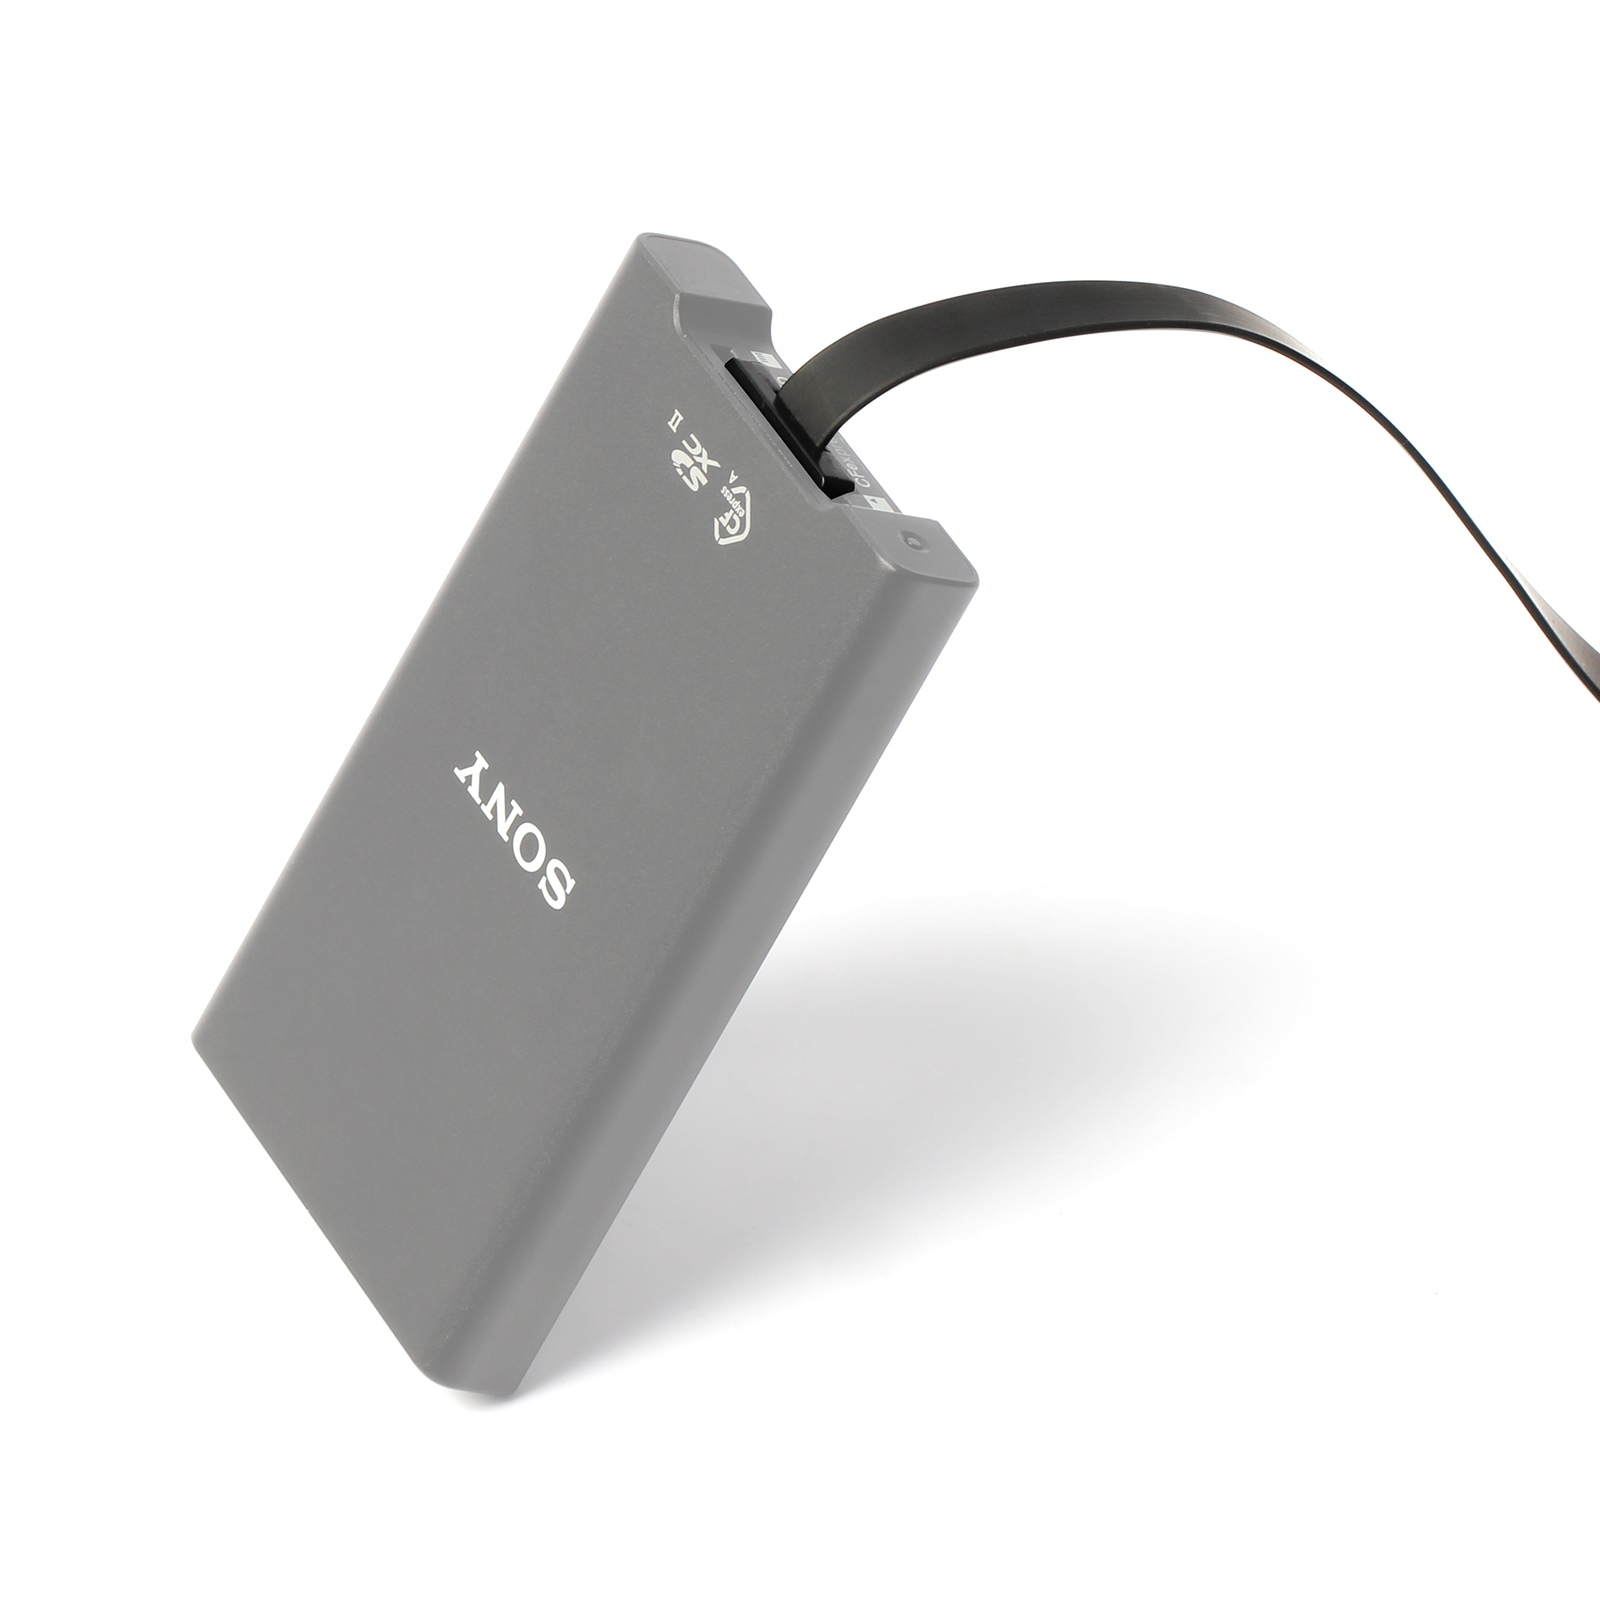 US$ 179.00 - ZITAY CFexpress A to SSD Adapter Converter for Sony 